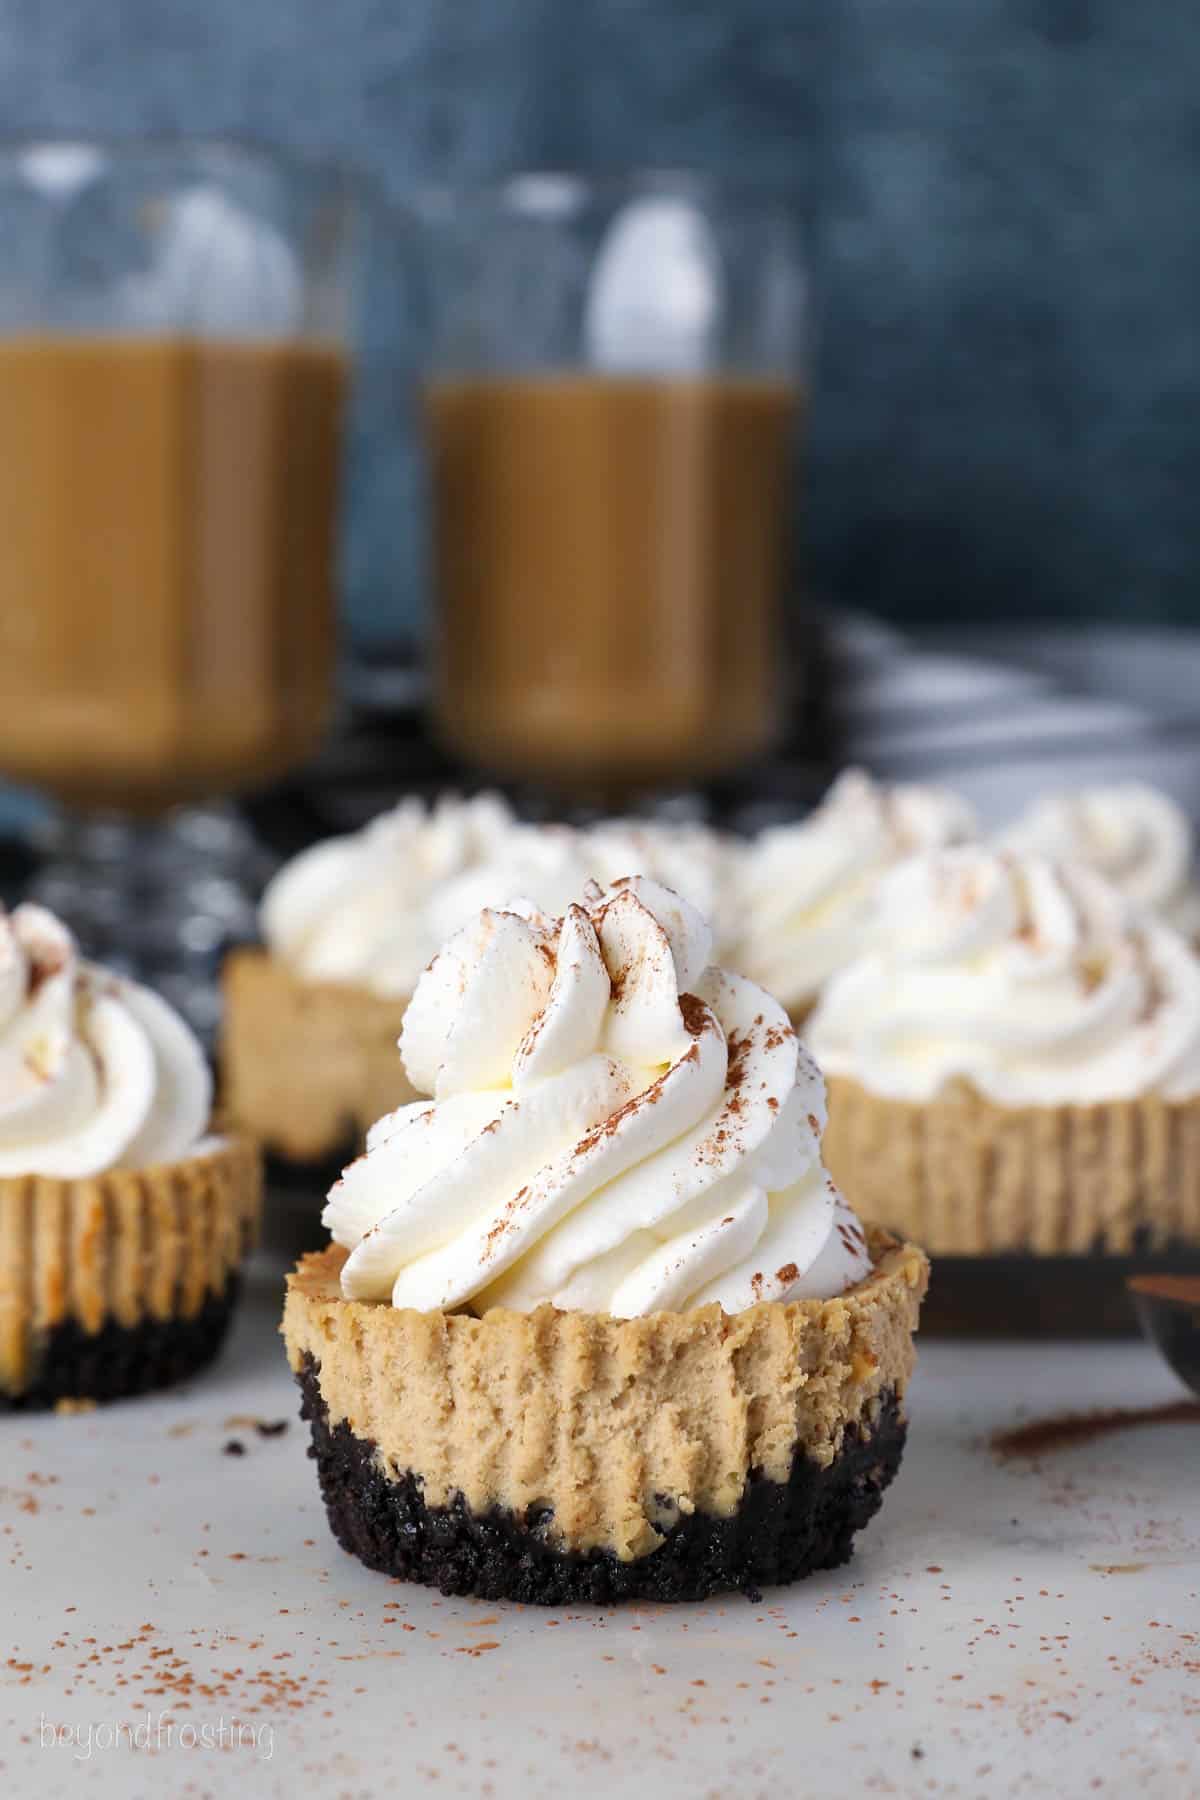 Mini coffee cheesecakes dusted with cocoa powder and coffees in the background